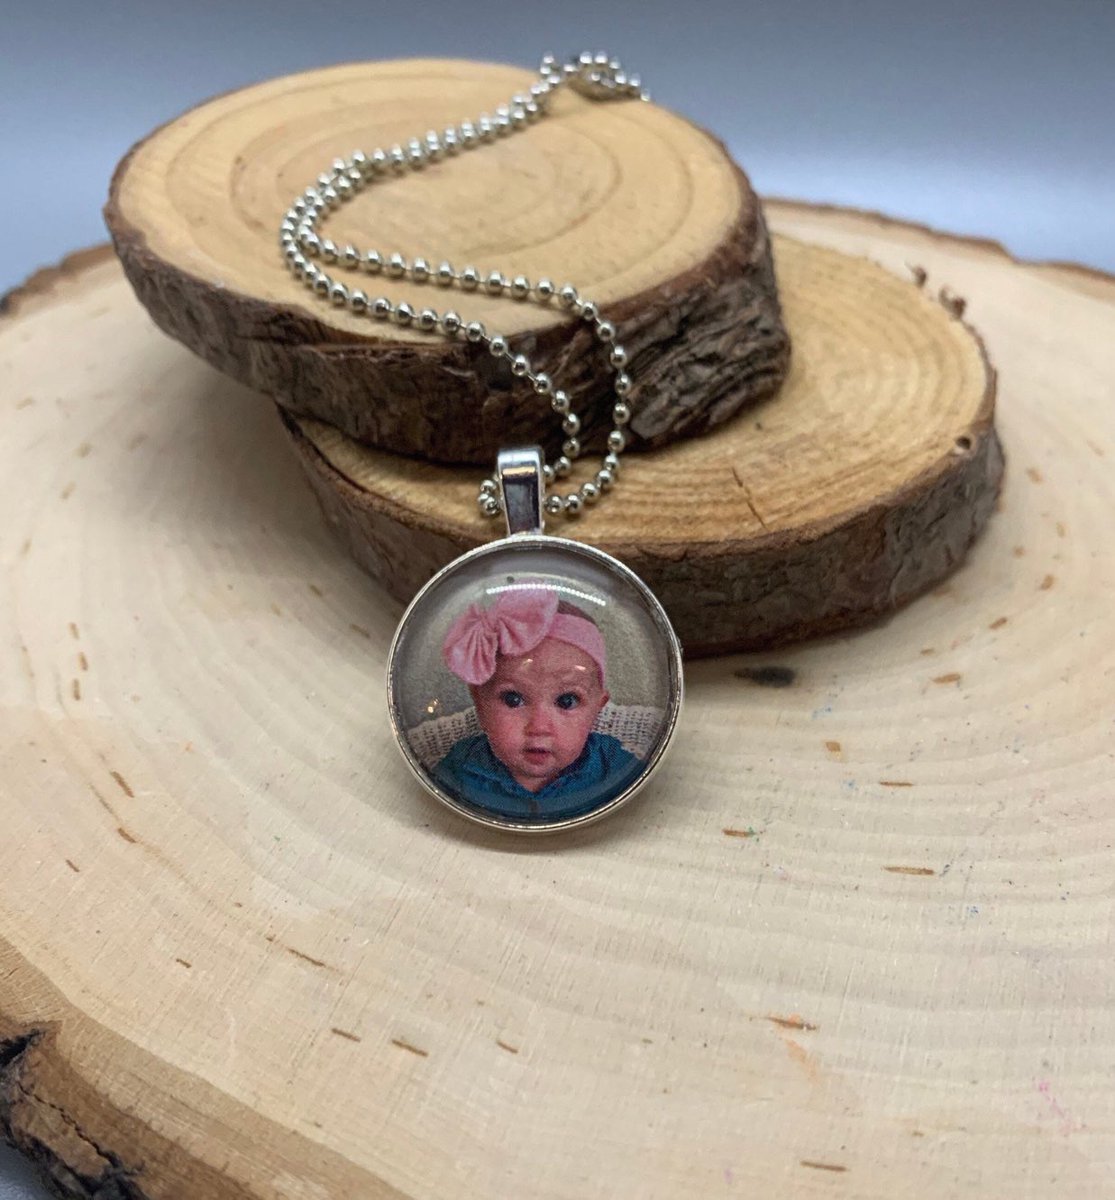 Excited to share this item from my #etsy shop: Photo Necklace Picture Jewelry Picture Pendant Photo Necklace #Picturecharm #picturependant #photopendant #photocharm Adorn by Jennifer etsy.me/3oAFEQG